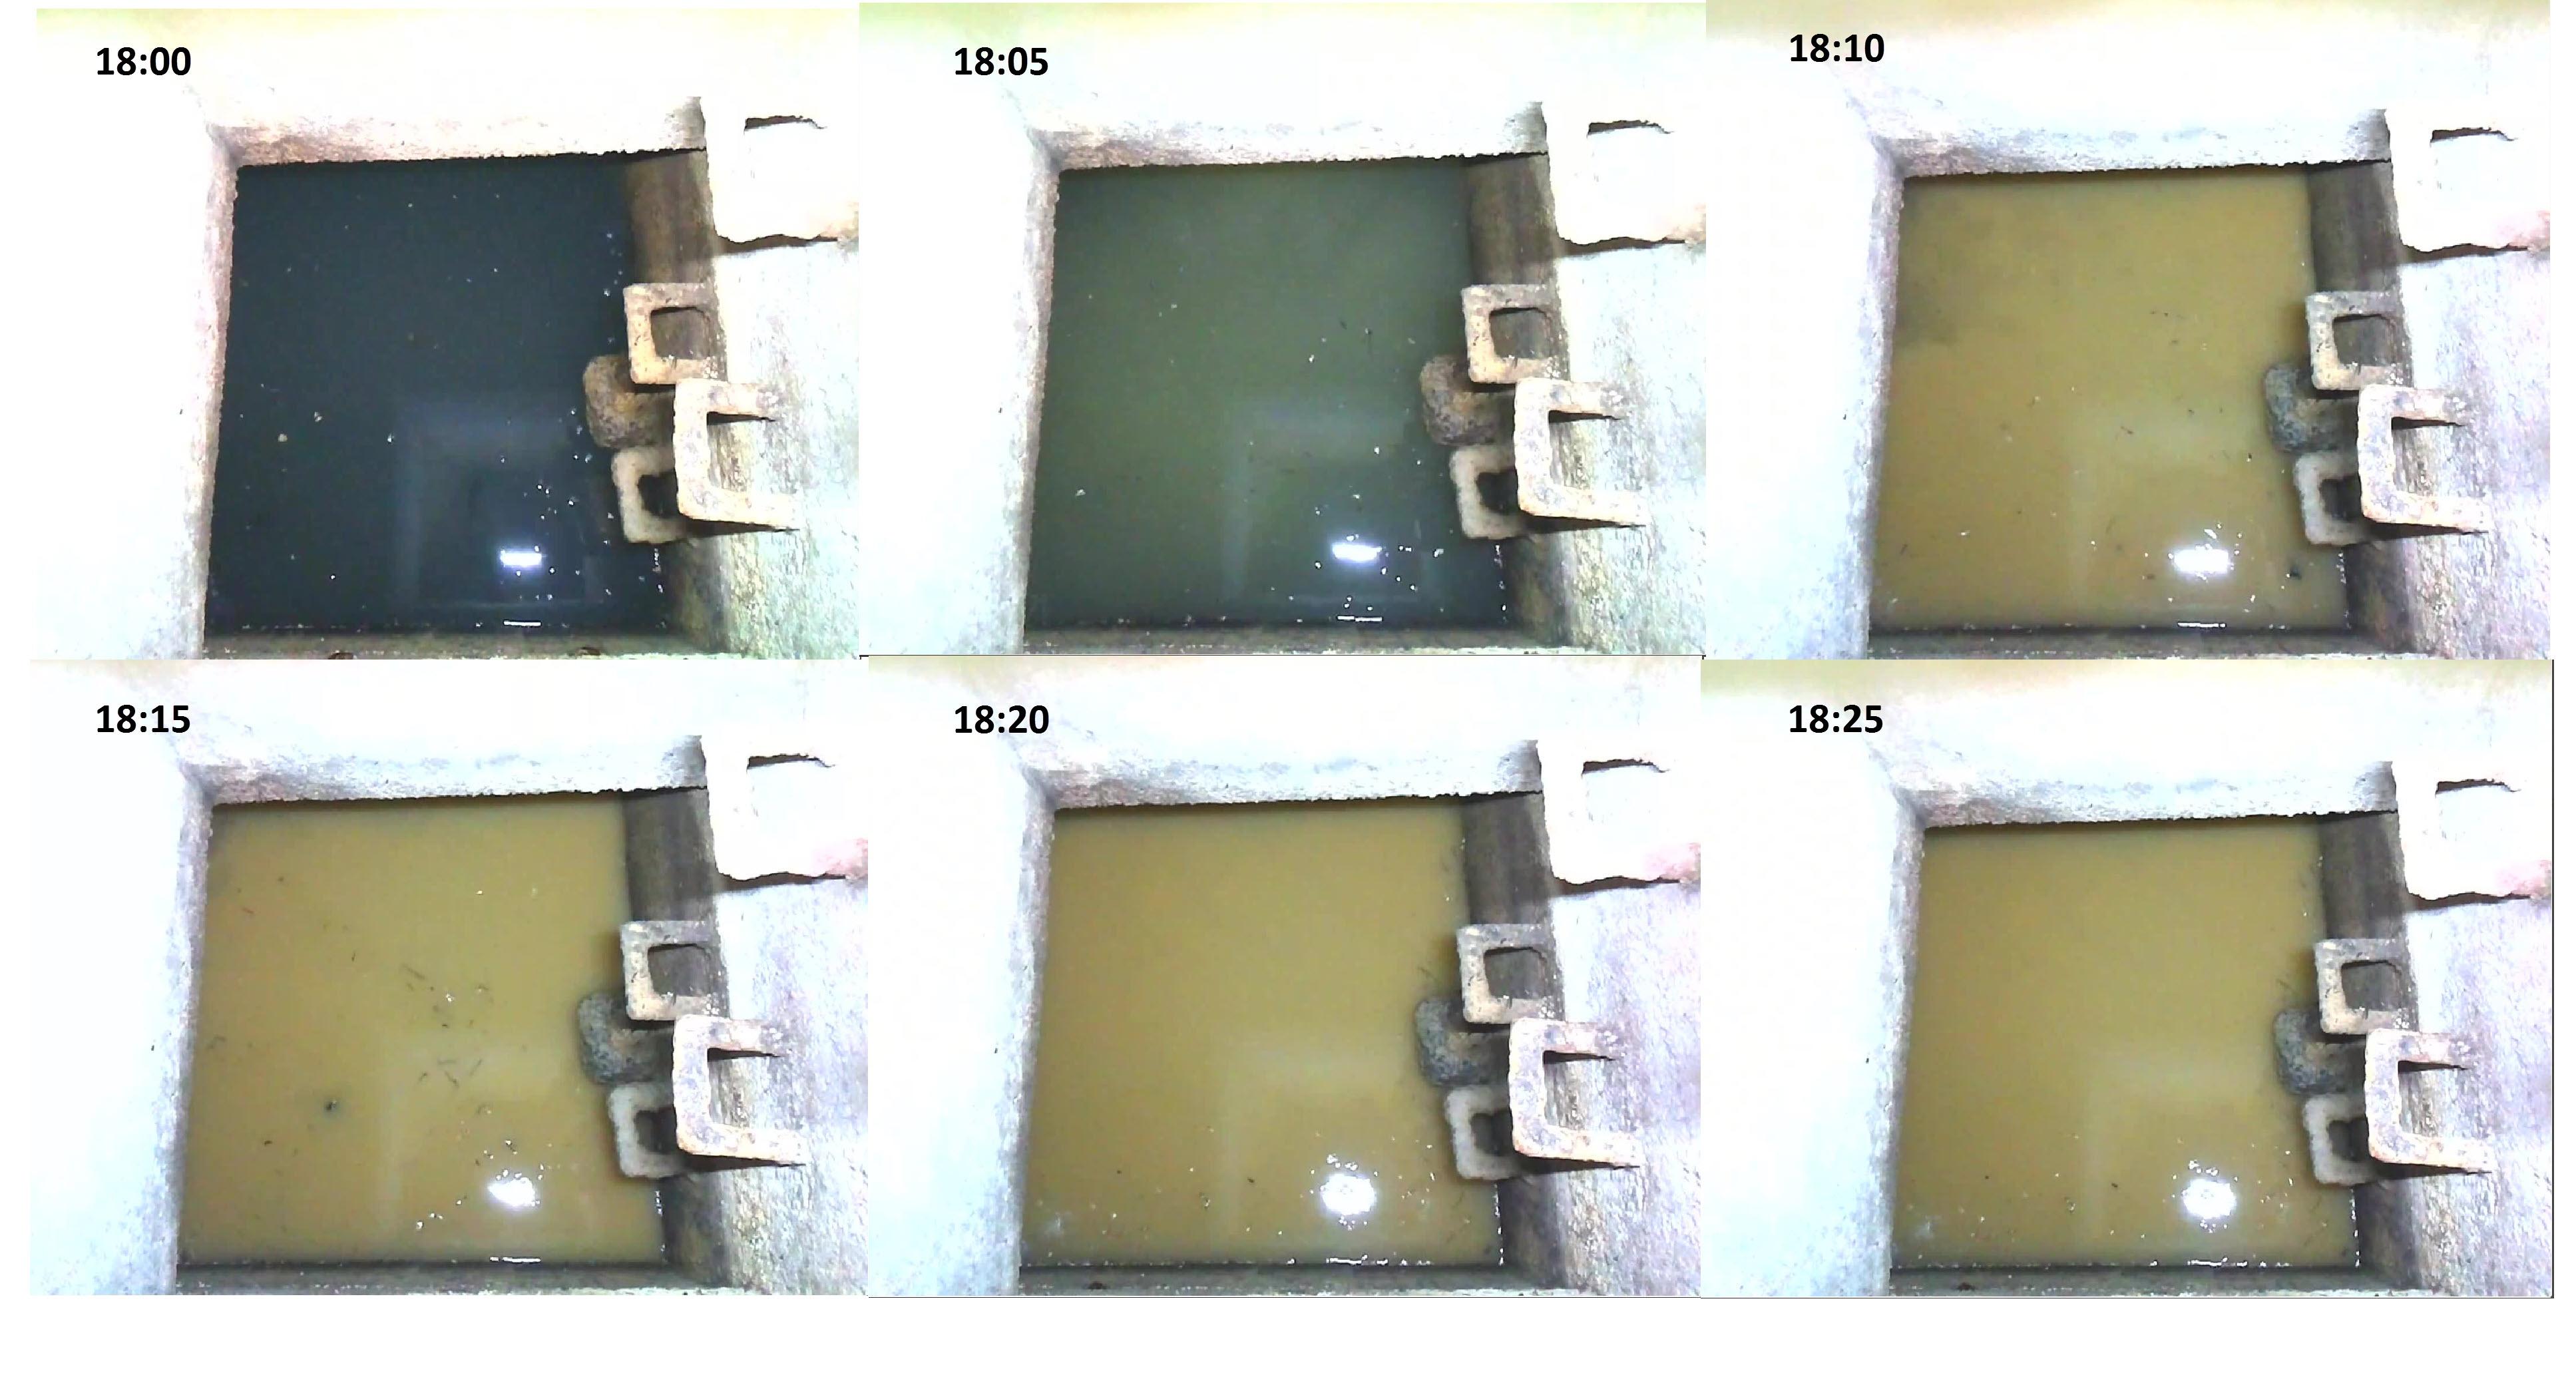 The Environmental Protection Department conducts real-time surveillance of the public drainage system with its smart surveillance system. Photo shows a video capture of the system, which reveals the wastewater colour changing at an underground manhole at different times, indicating an unusual discharging situation. The smart system will notify enforcement officers immediately once an unusual discharge is found.